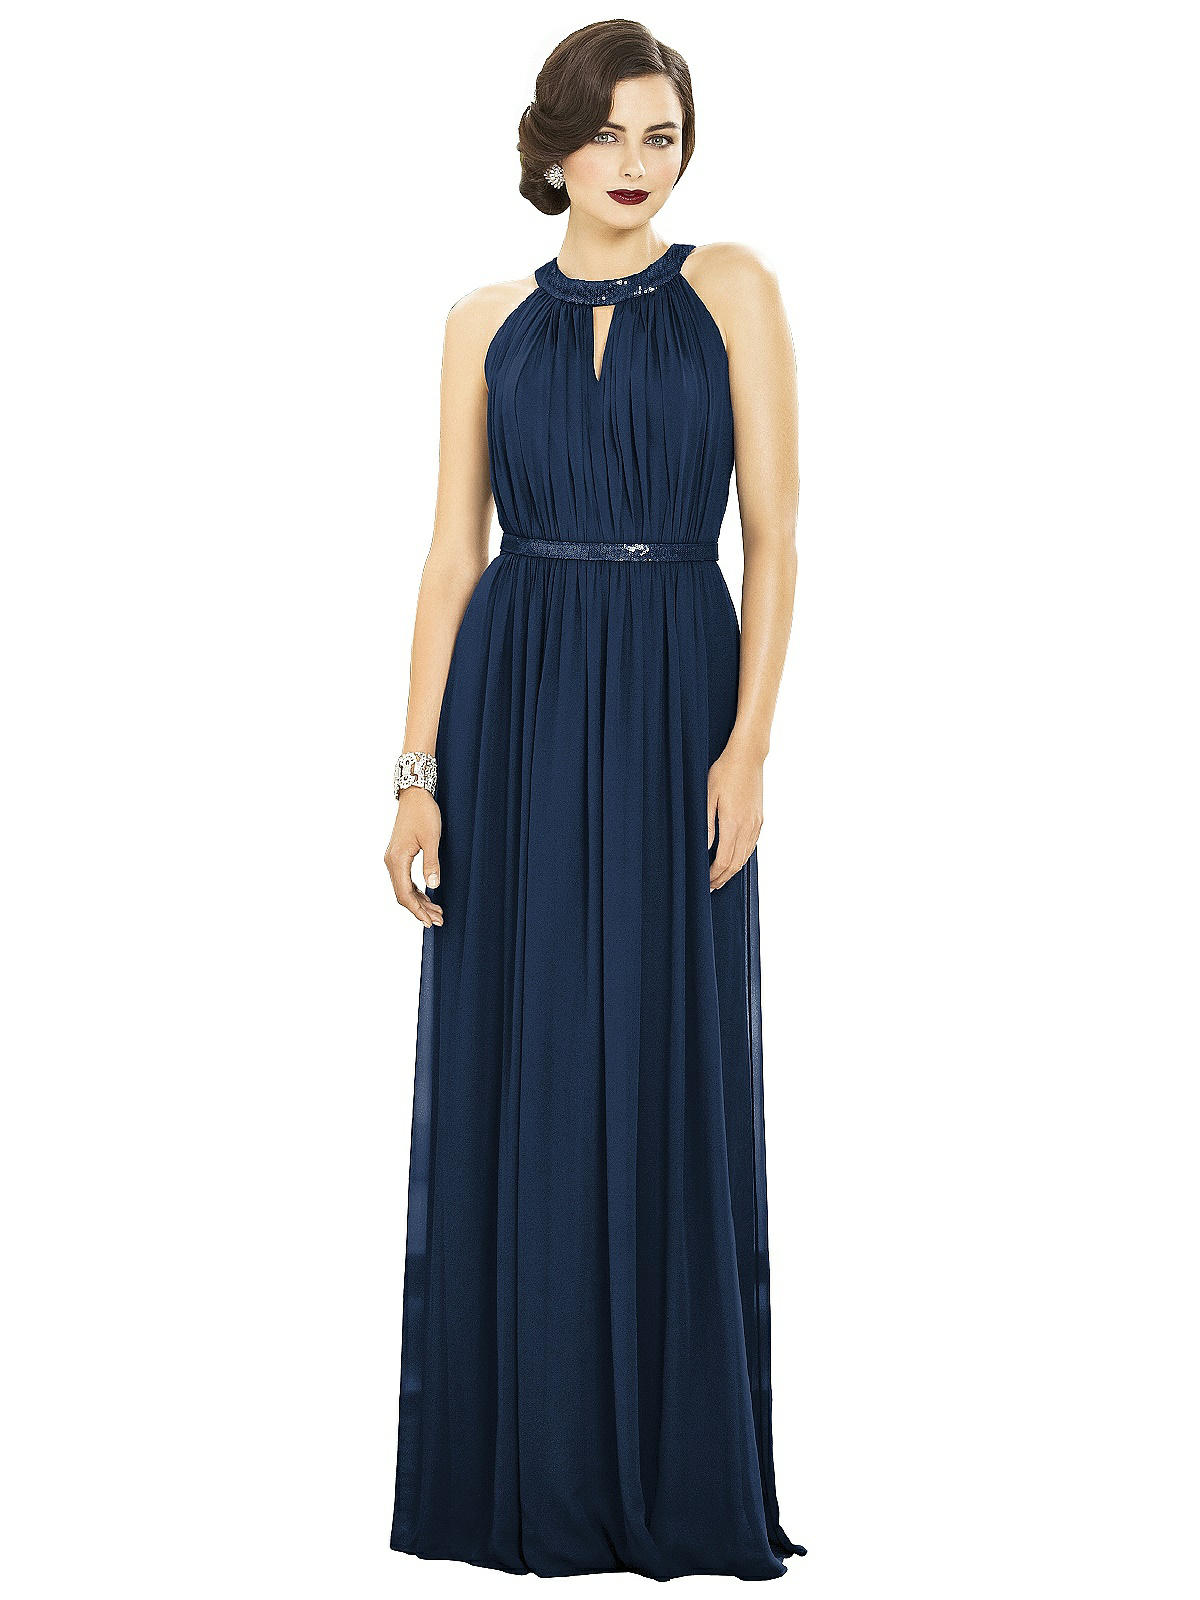 Dessy Collection Bridesmaid Dress 2887 | The Dessy Group